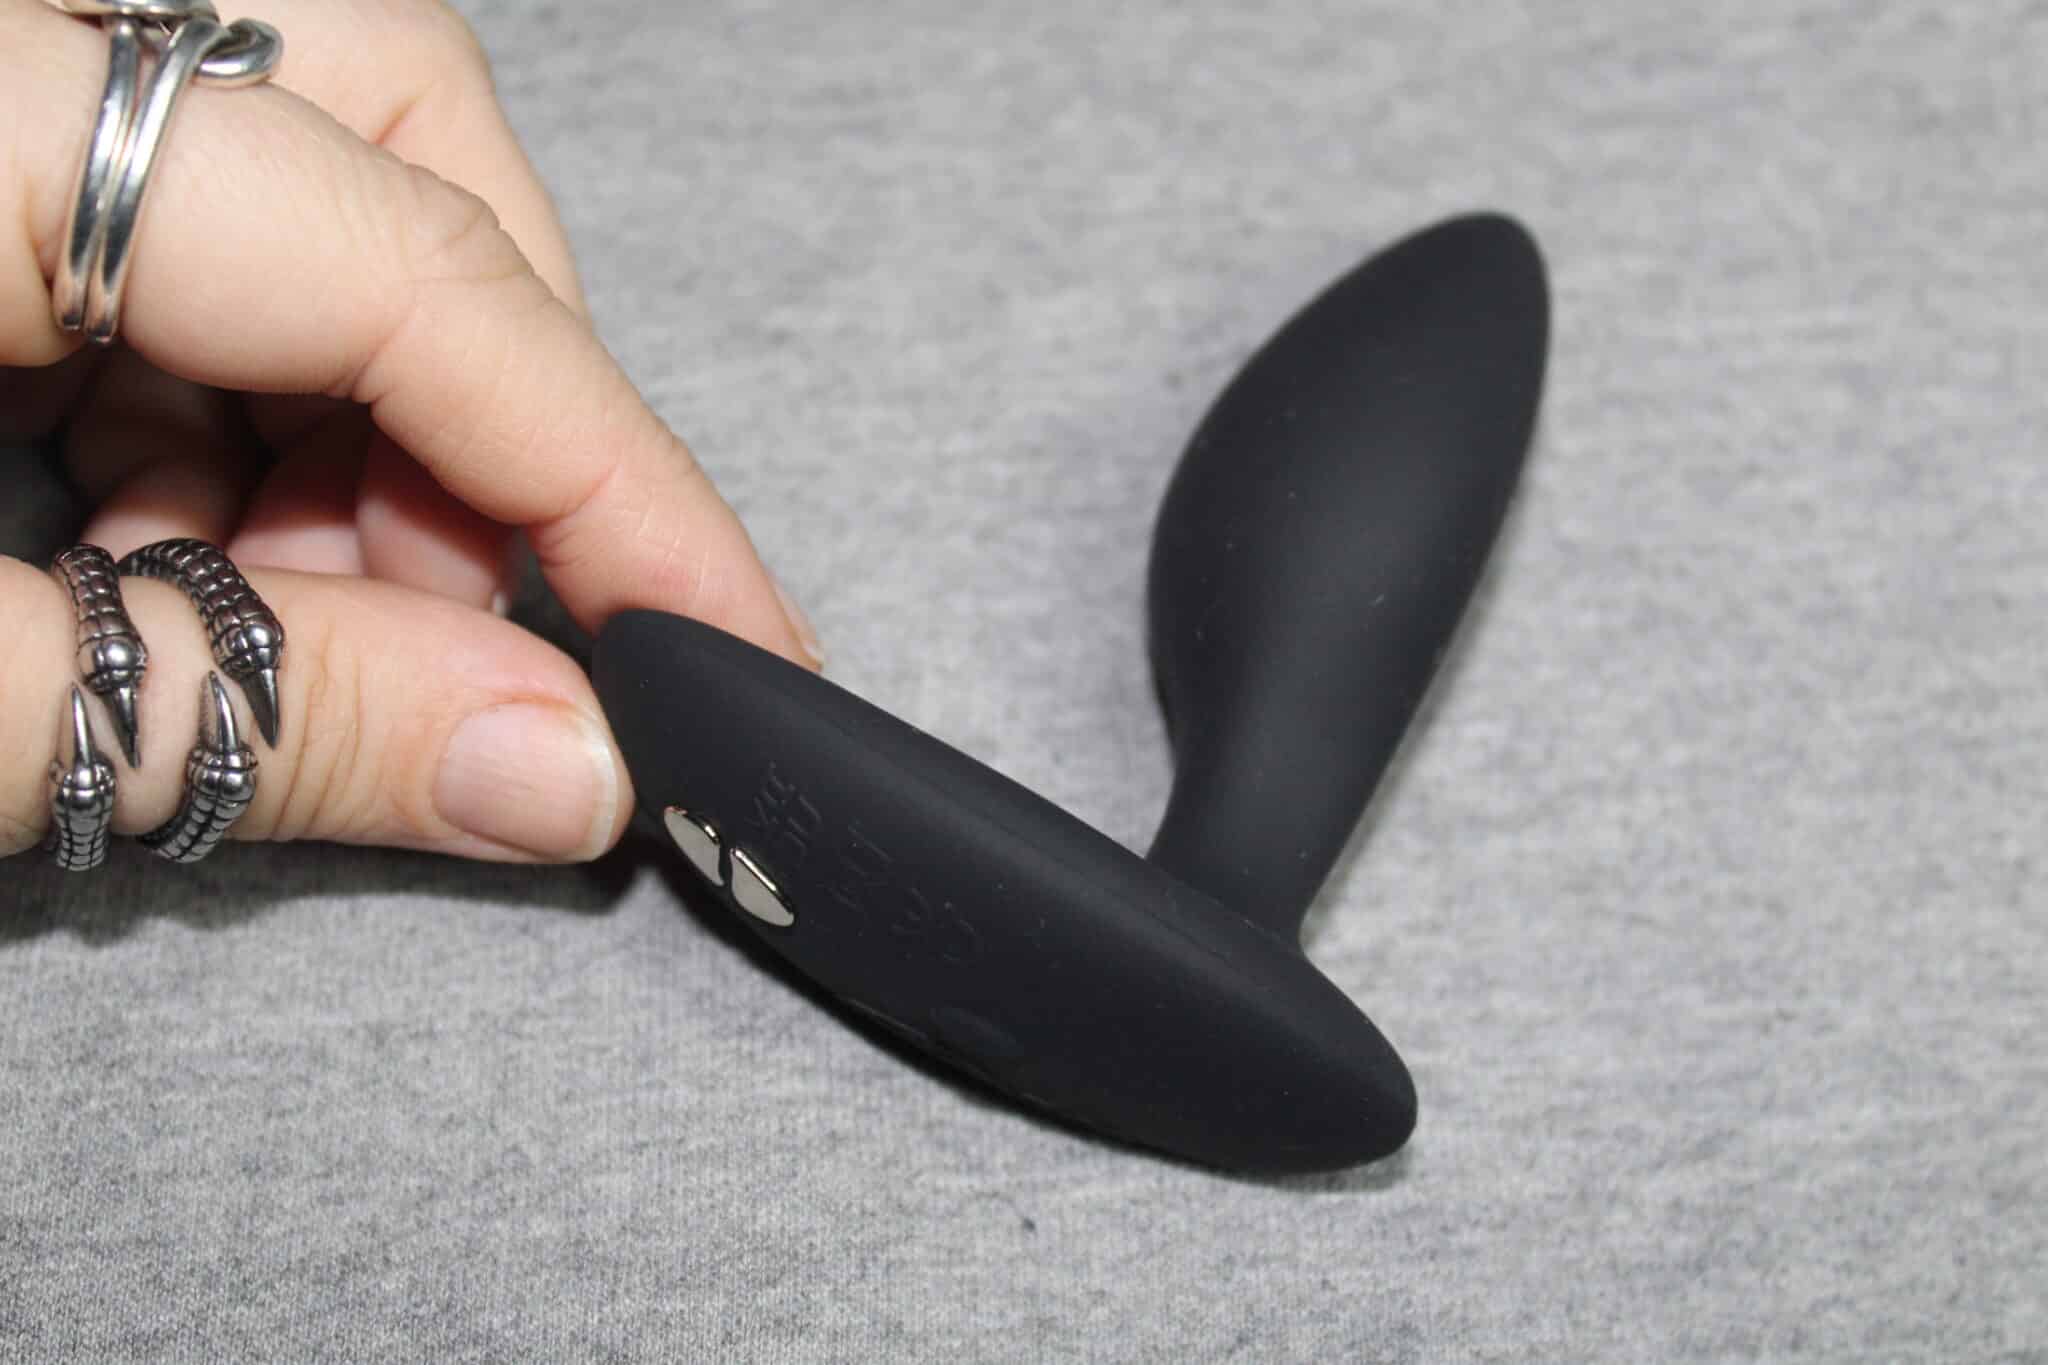 We-Vibe Ditto+ Rating the We-Vibe Ditto+’s design